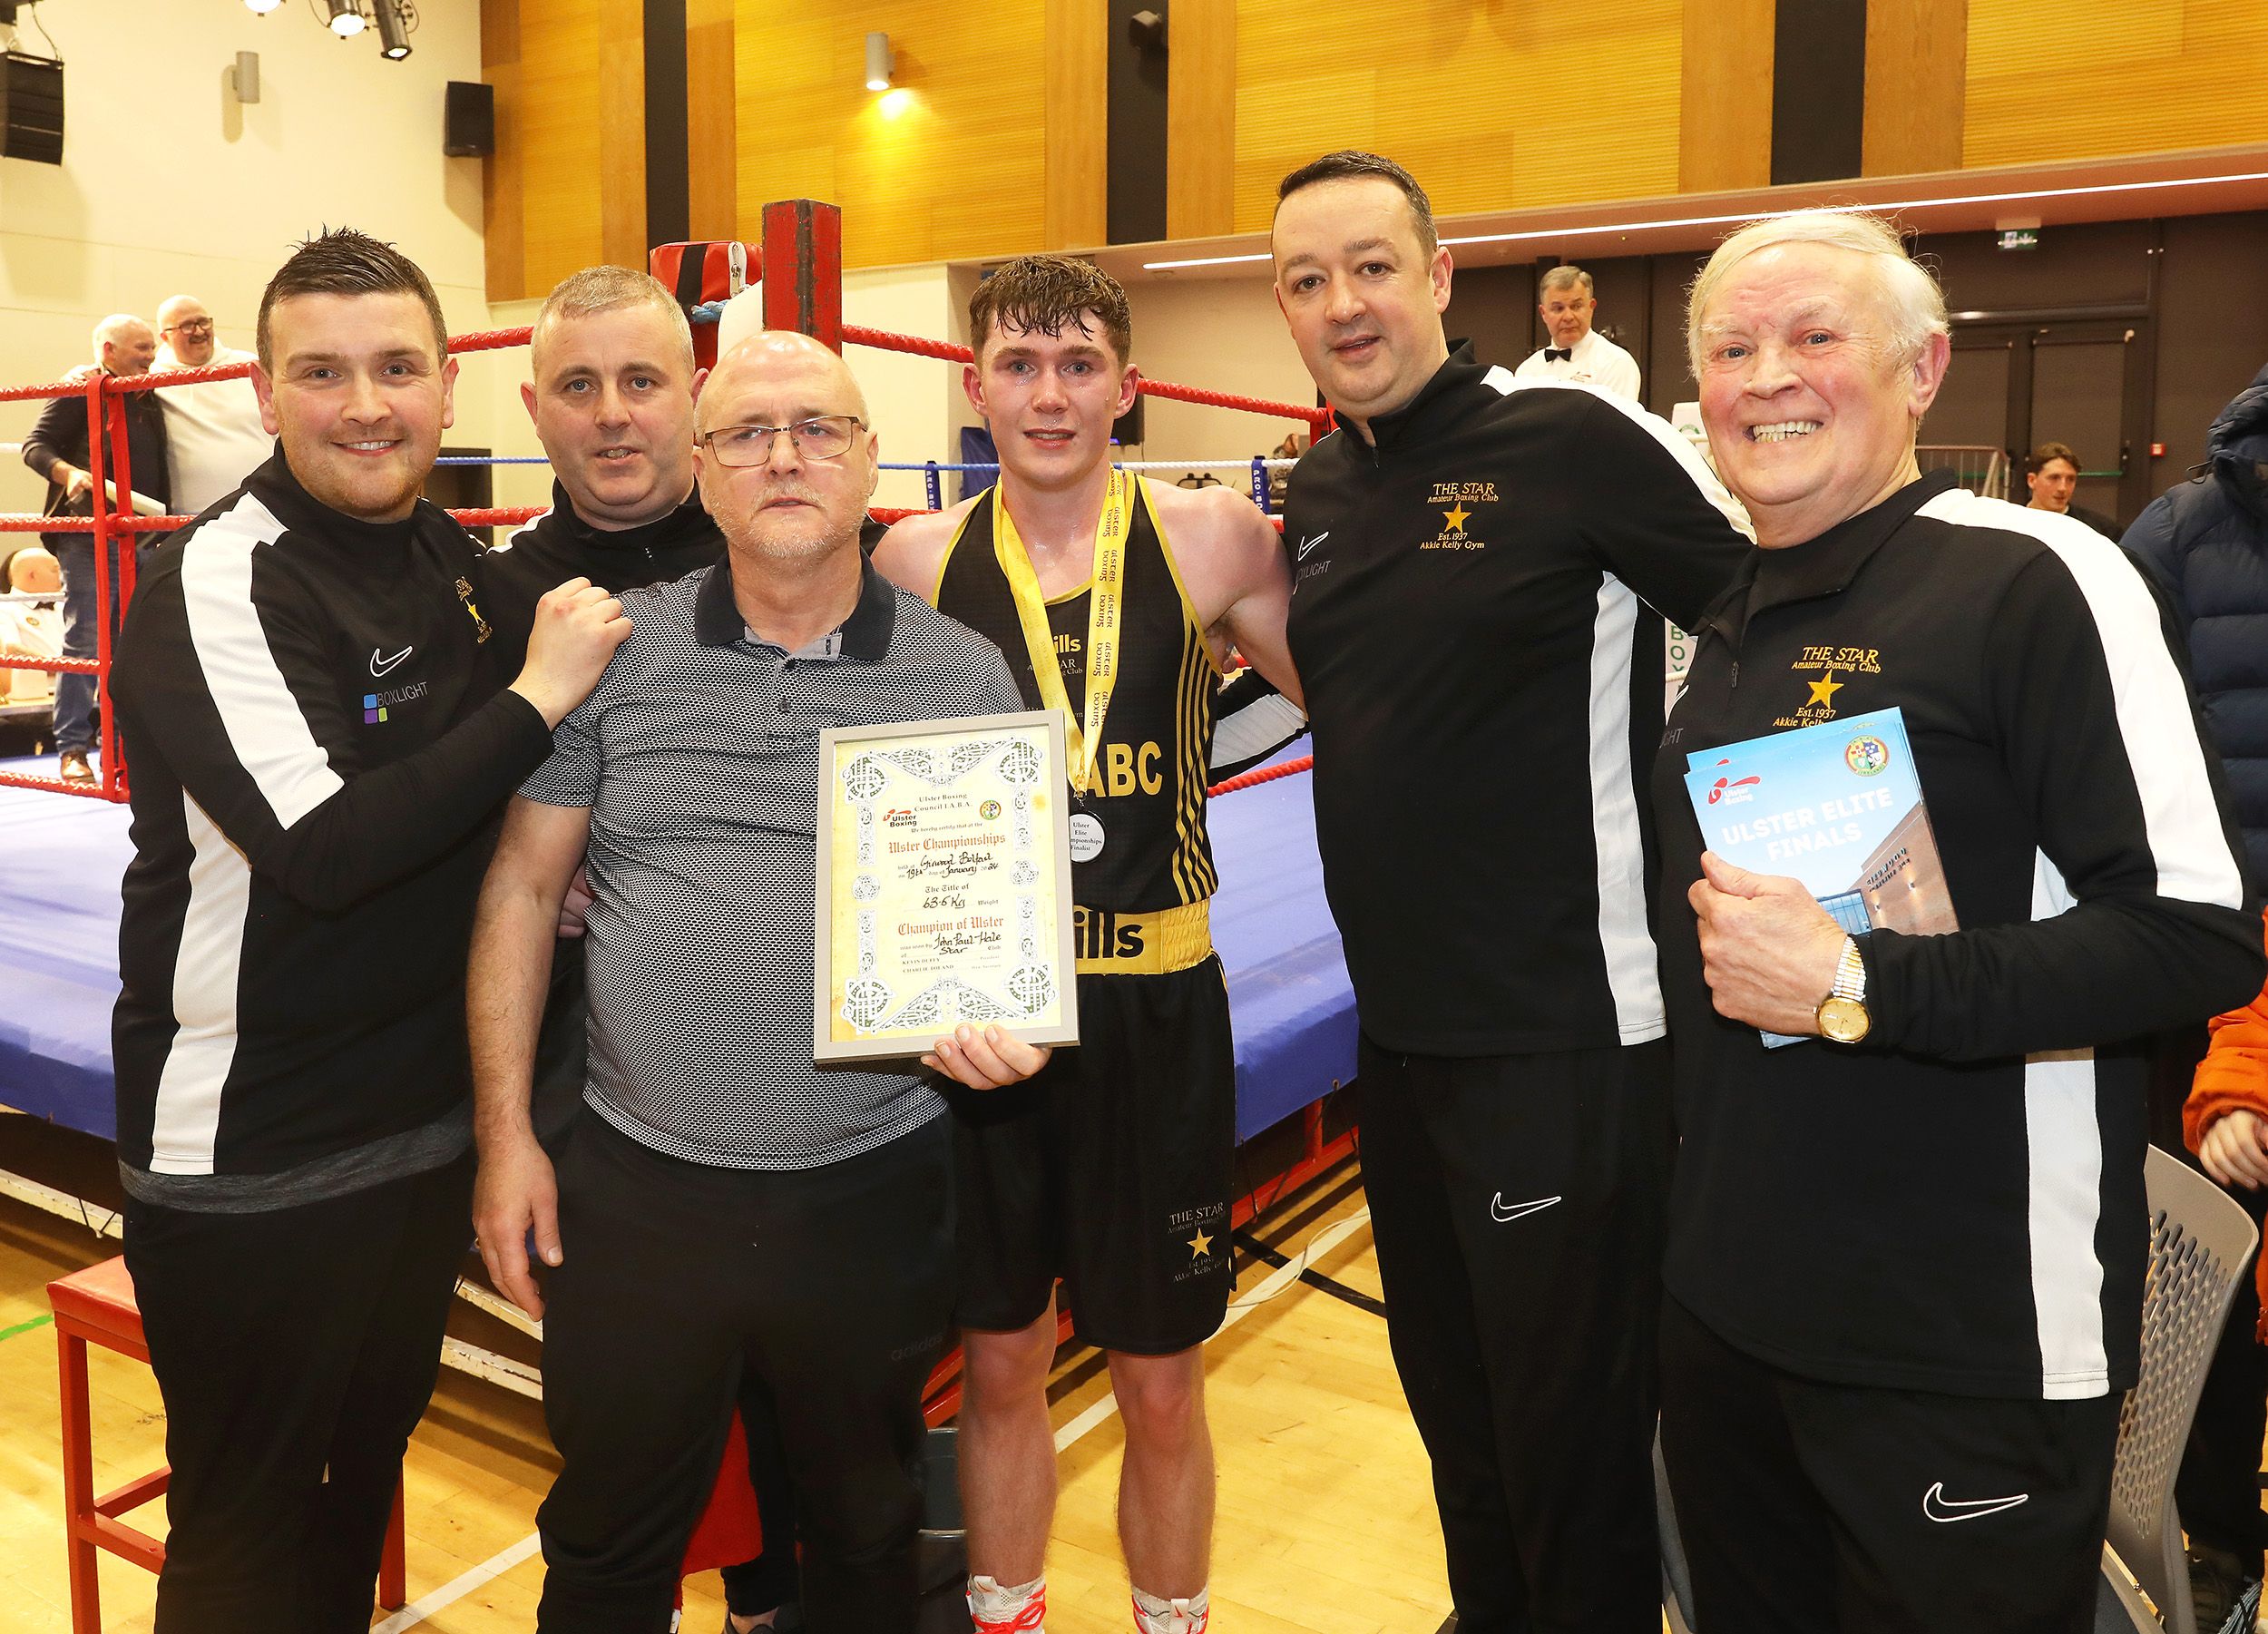 JP Hale with his coaches and team as he claimed his fourth Ulster Elite title on Friday 